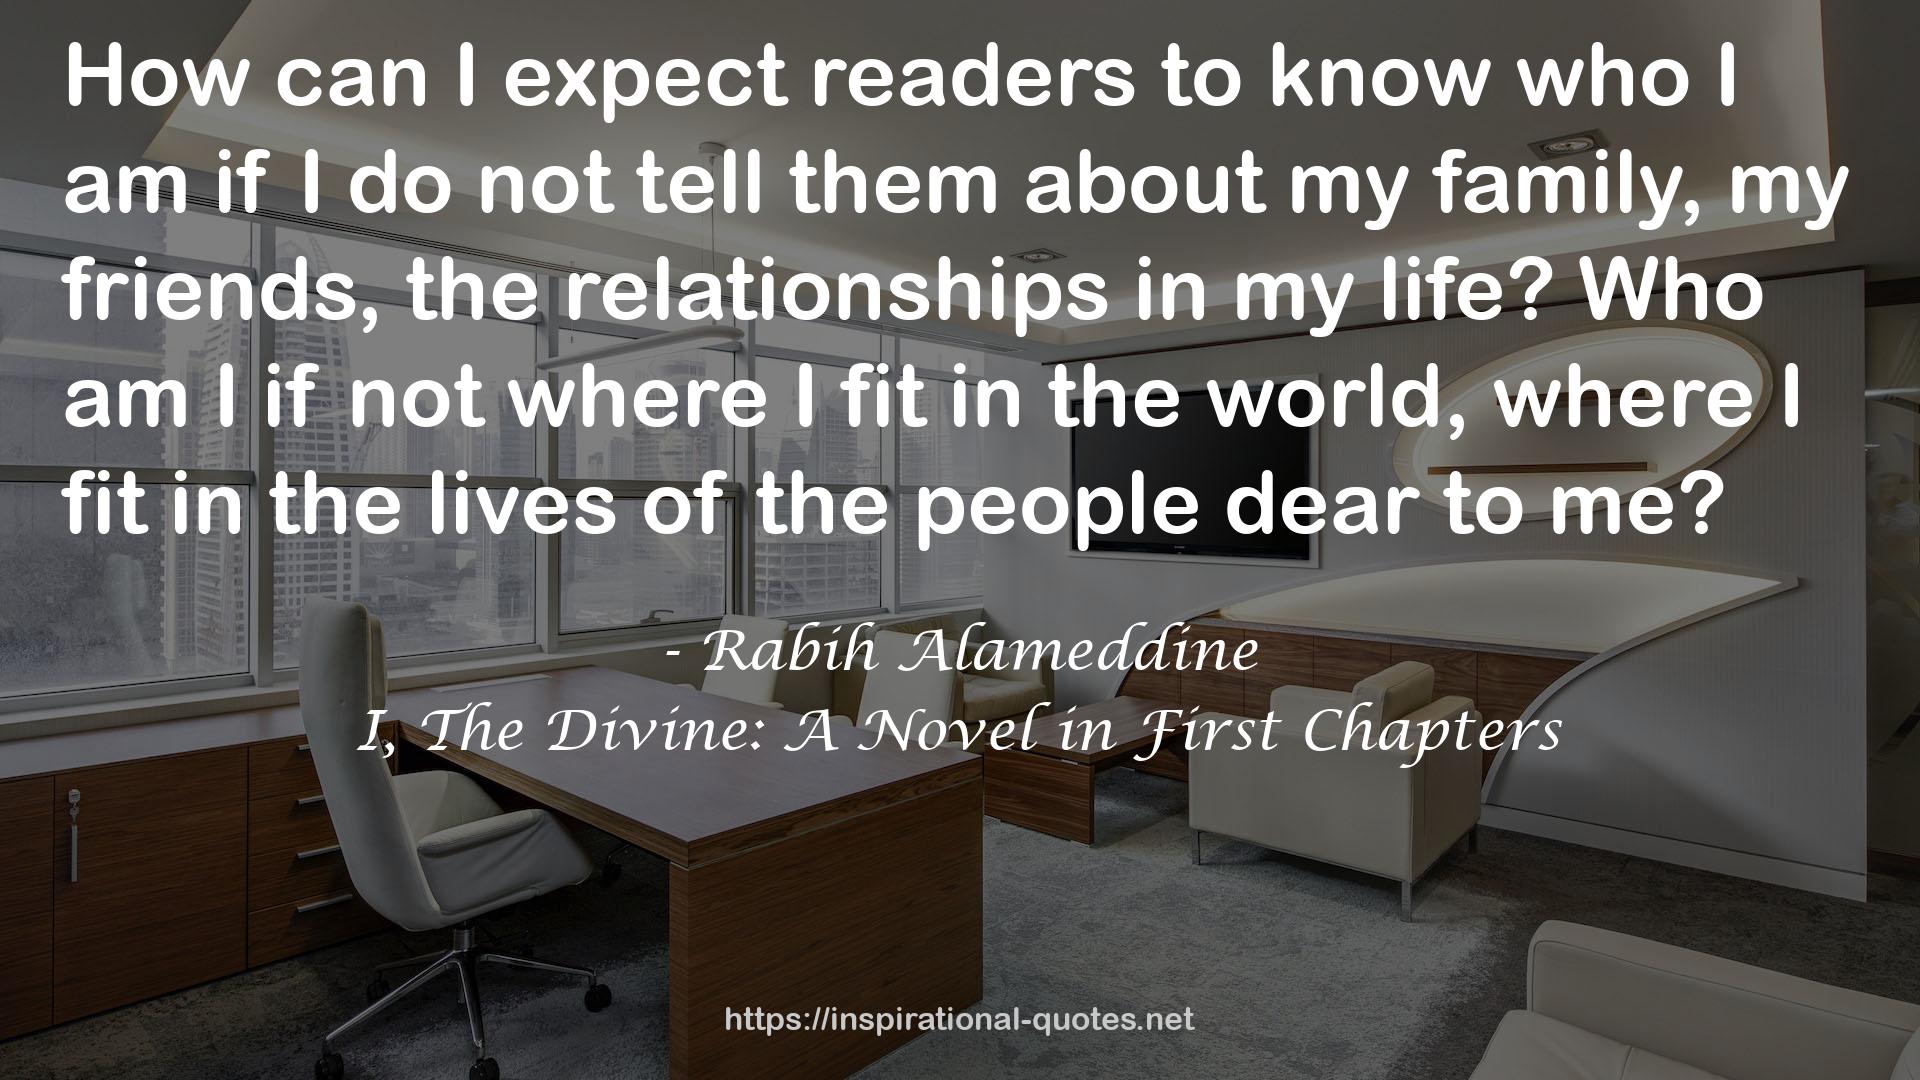 I, The Divine: A Novel in First Chapters QUOTES